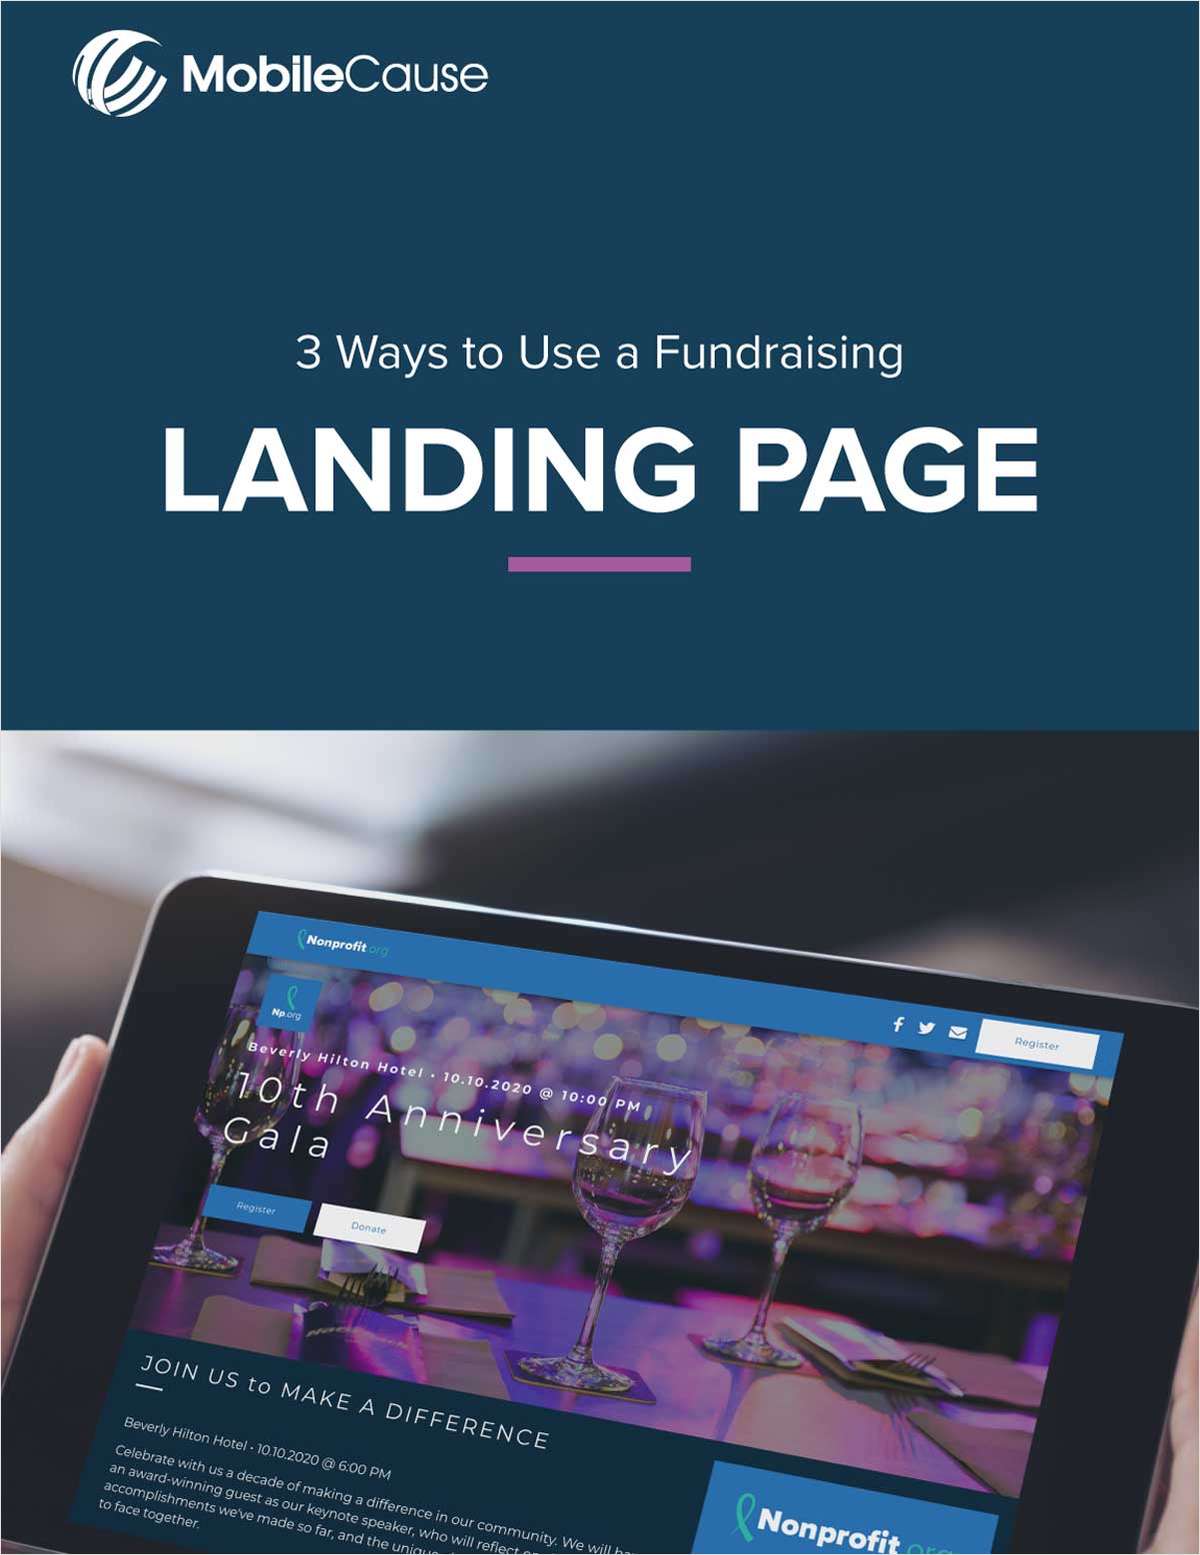 3 Ways to Use a Fundraising Landing Page